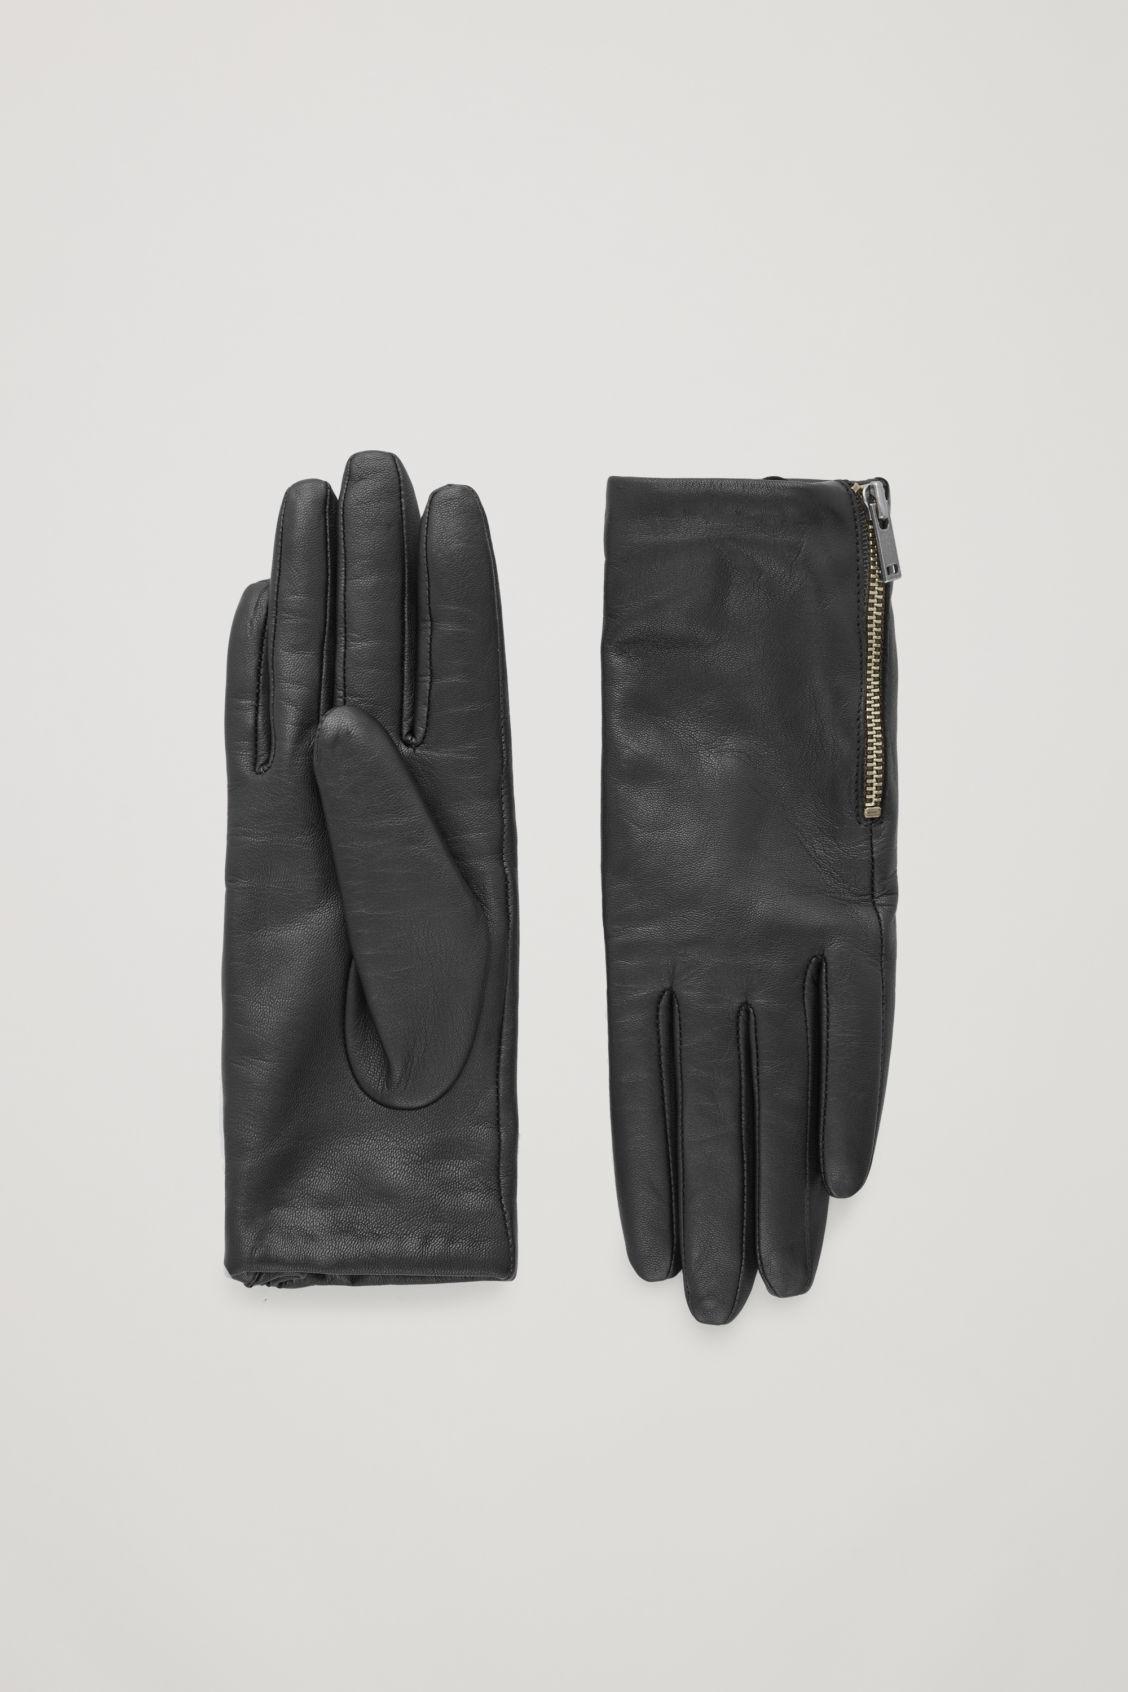 COS Cashmere-lined Zip Leather Gloves in Black - Lyst